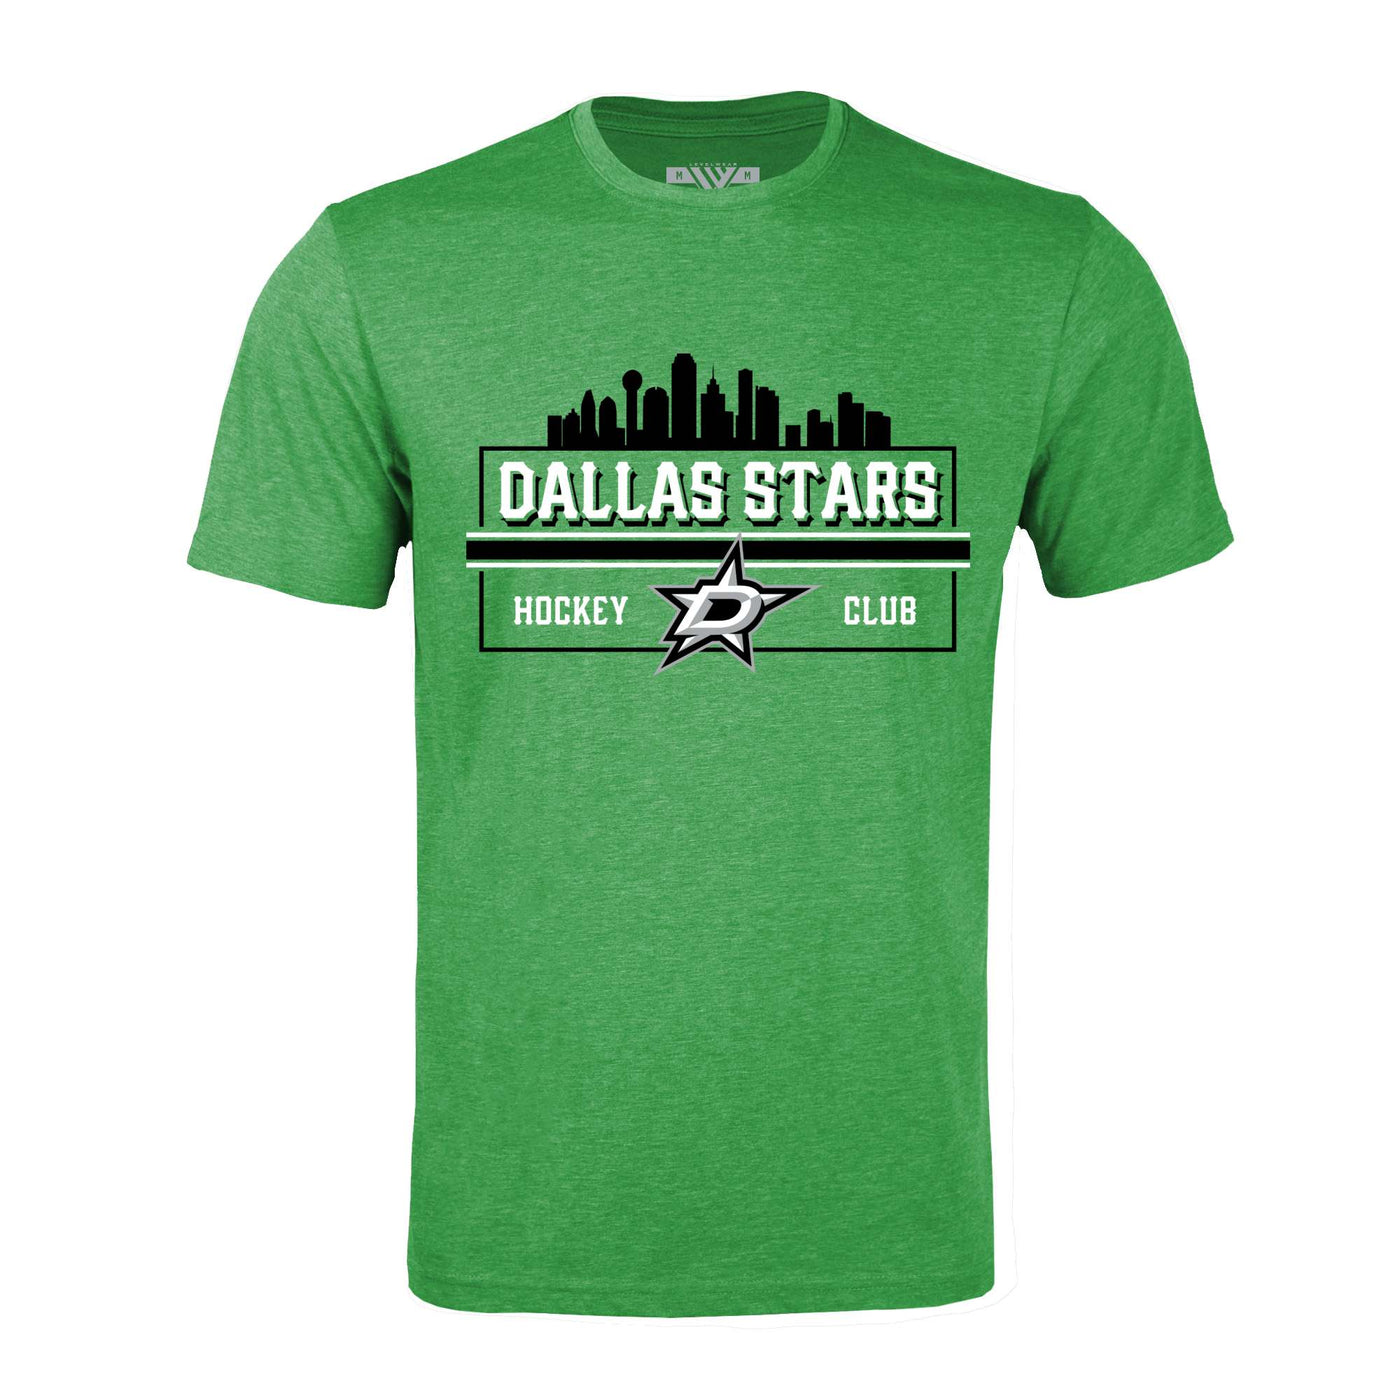 DALLAS STARS LEVELWEAR ROOPE HINTZ SKYLINE TEE - FRONT VIEW